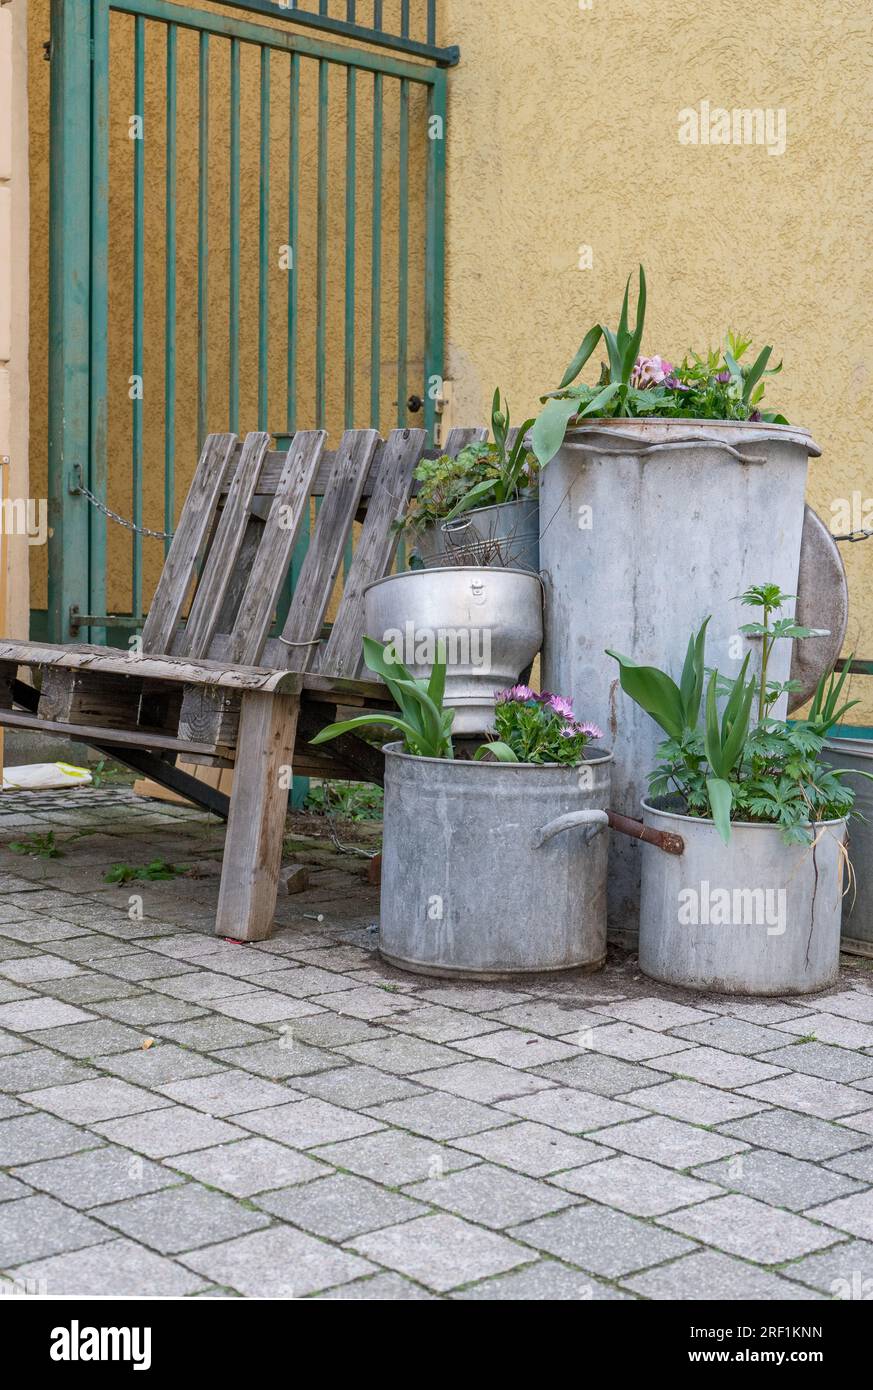 Garbage can and zinc pot planted with flowers Stock Photo